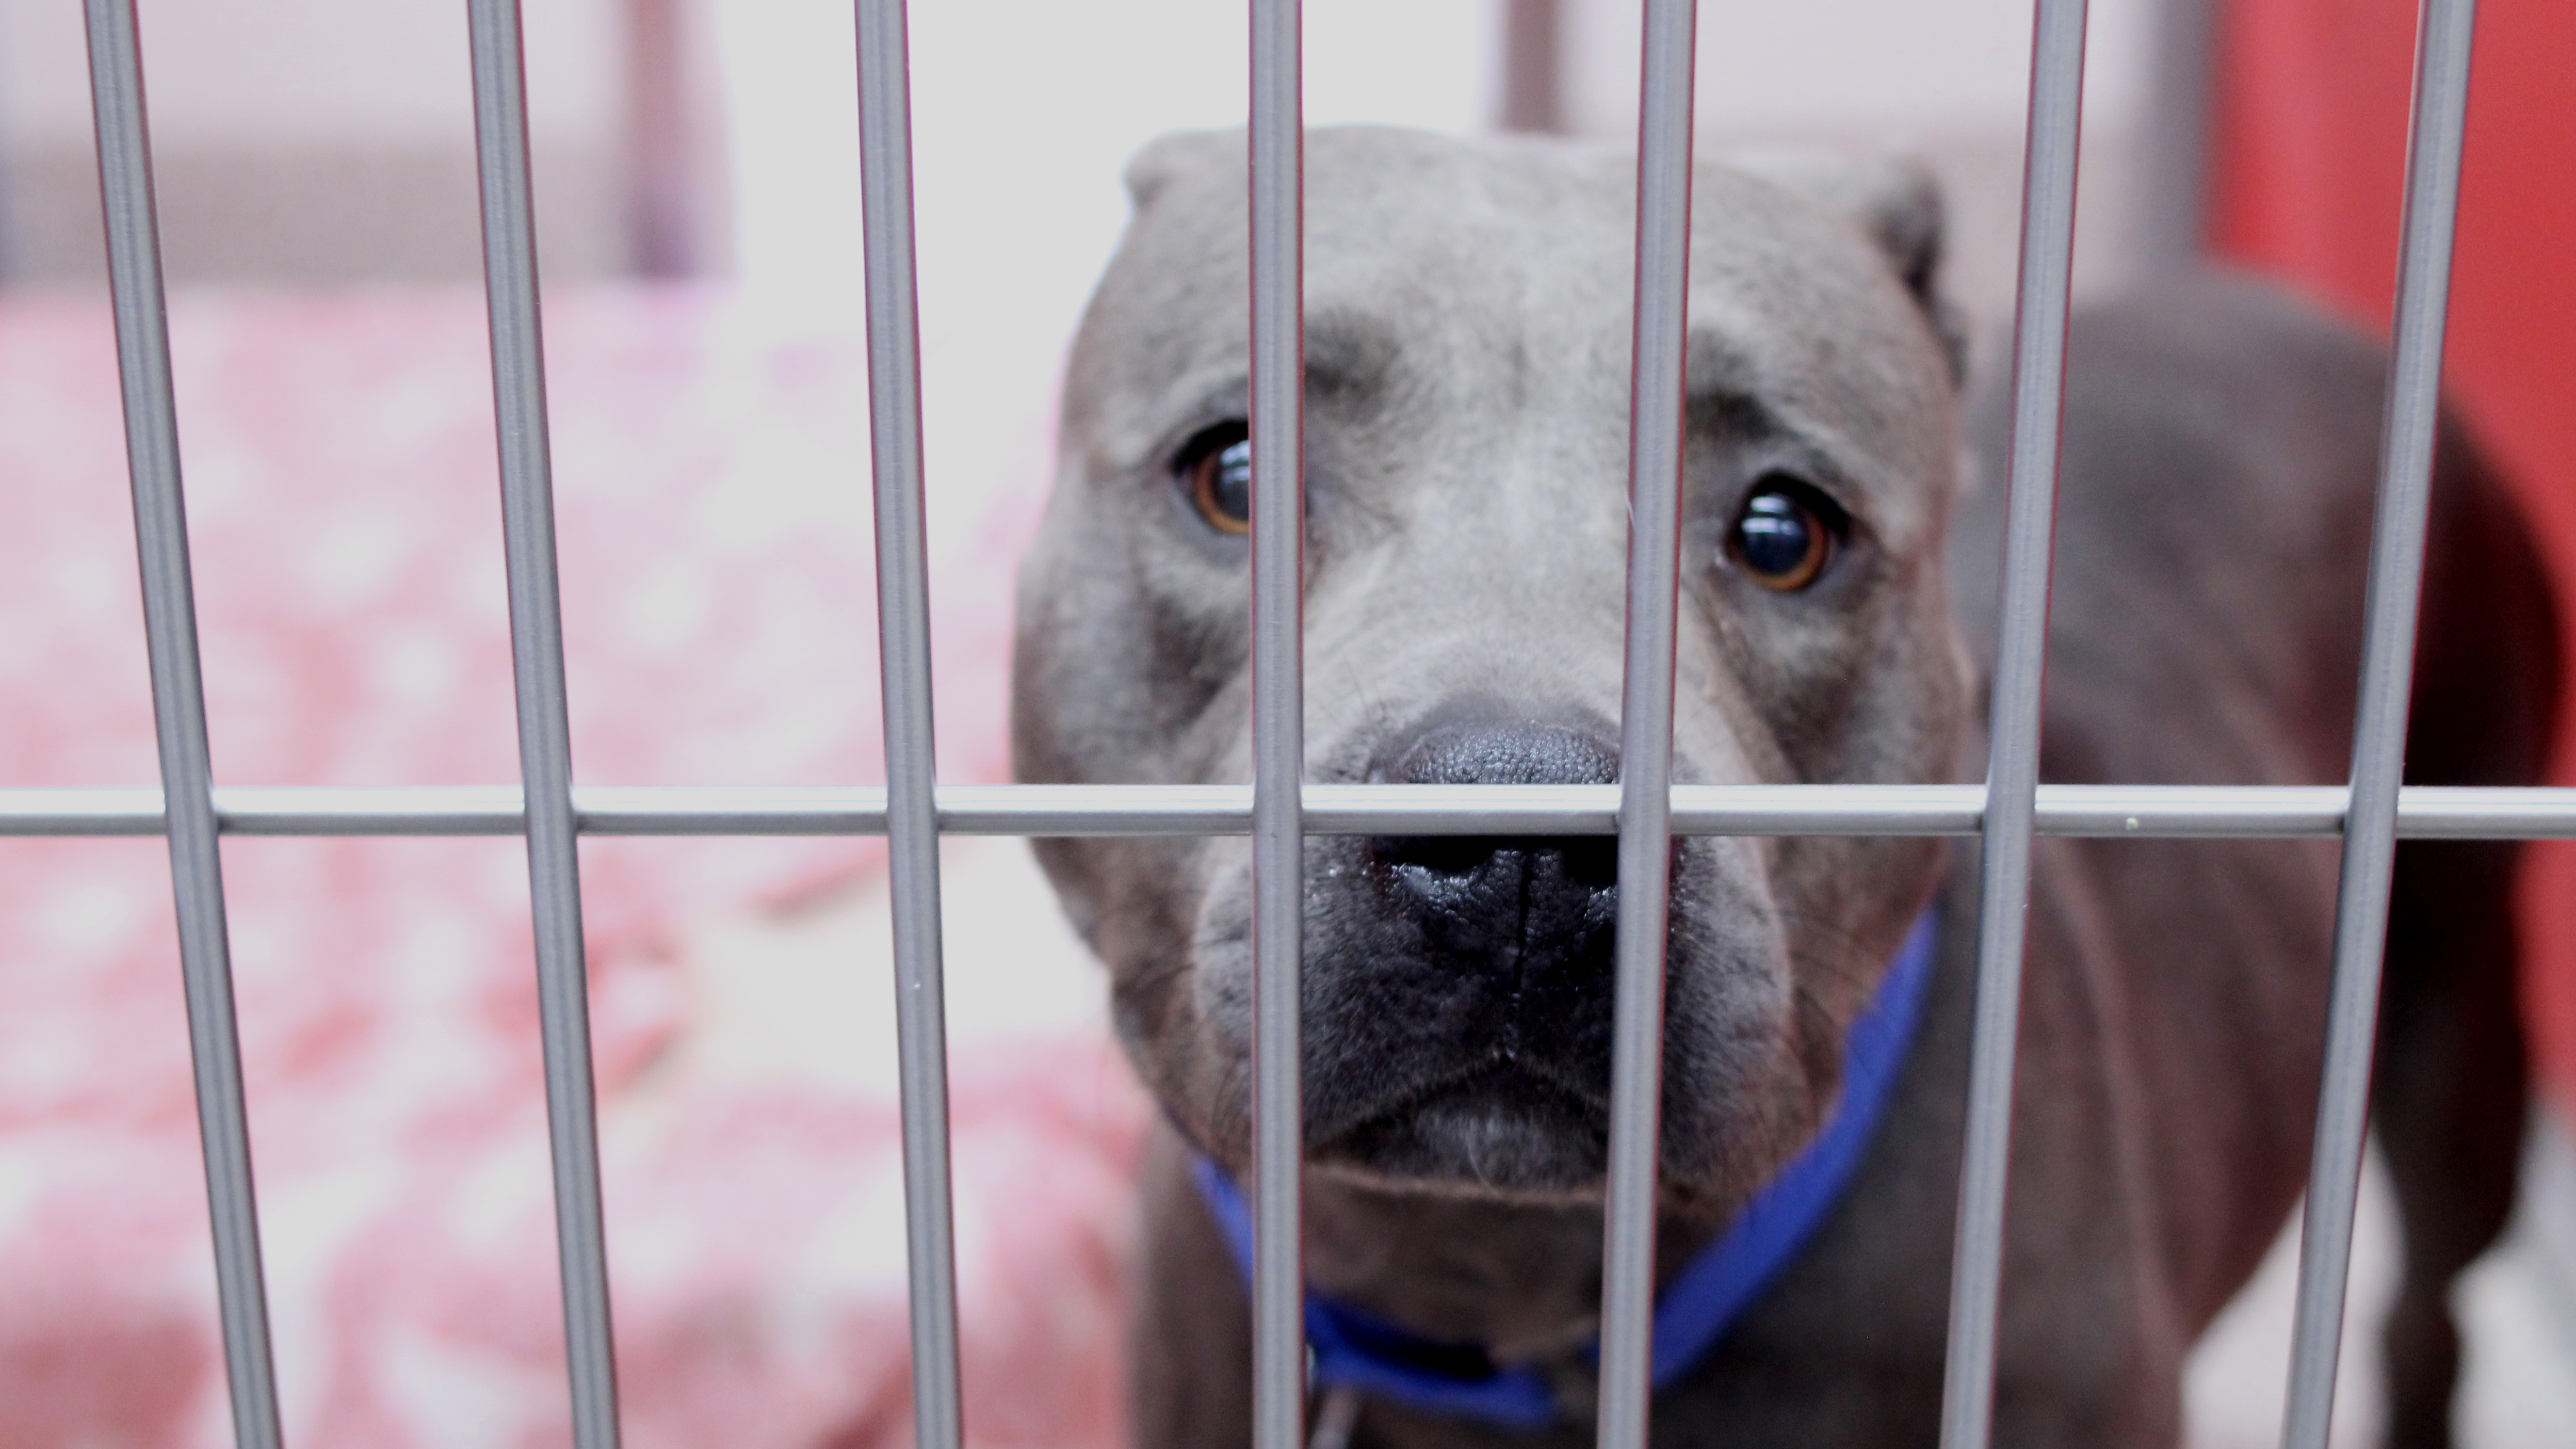 Local shelter may be forced to euthanize if overcrowding continues - AZPM